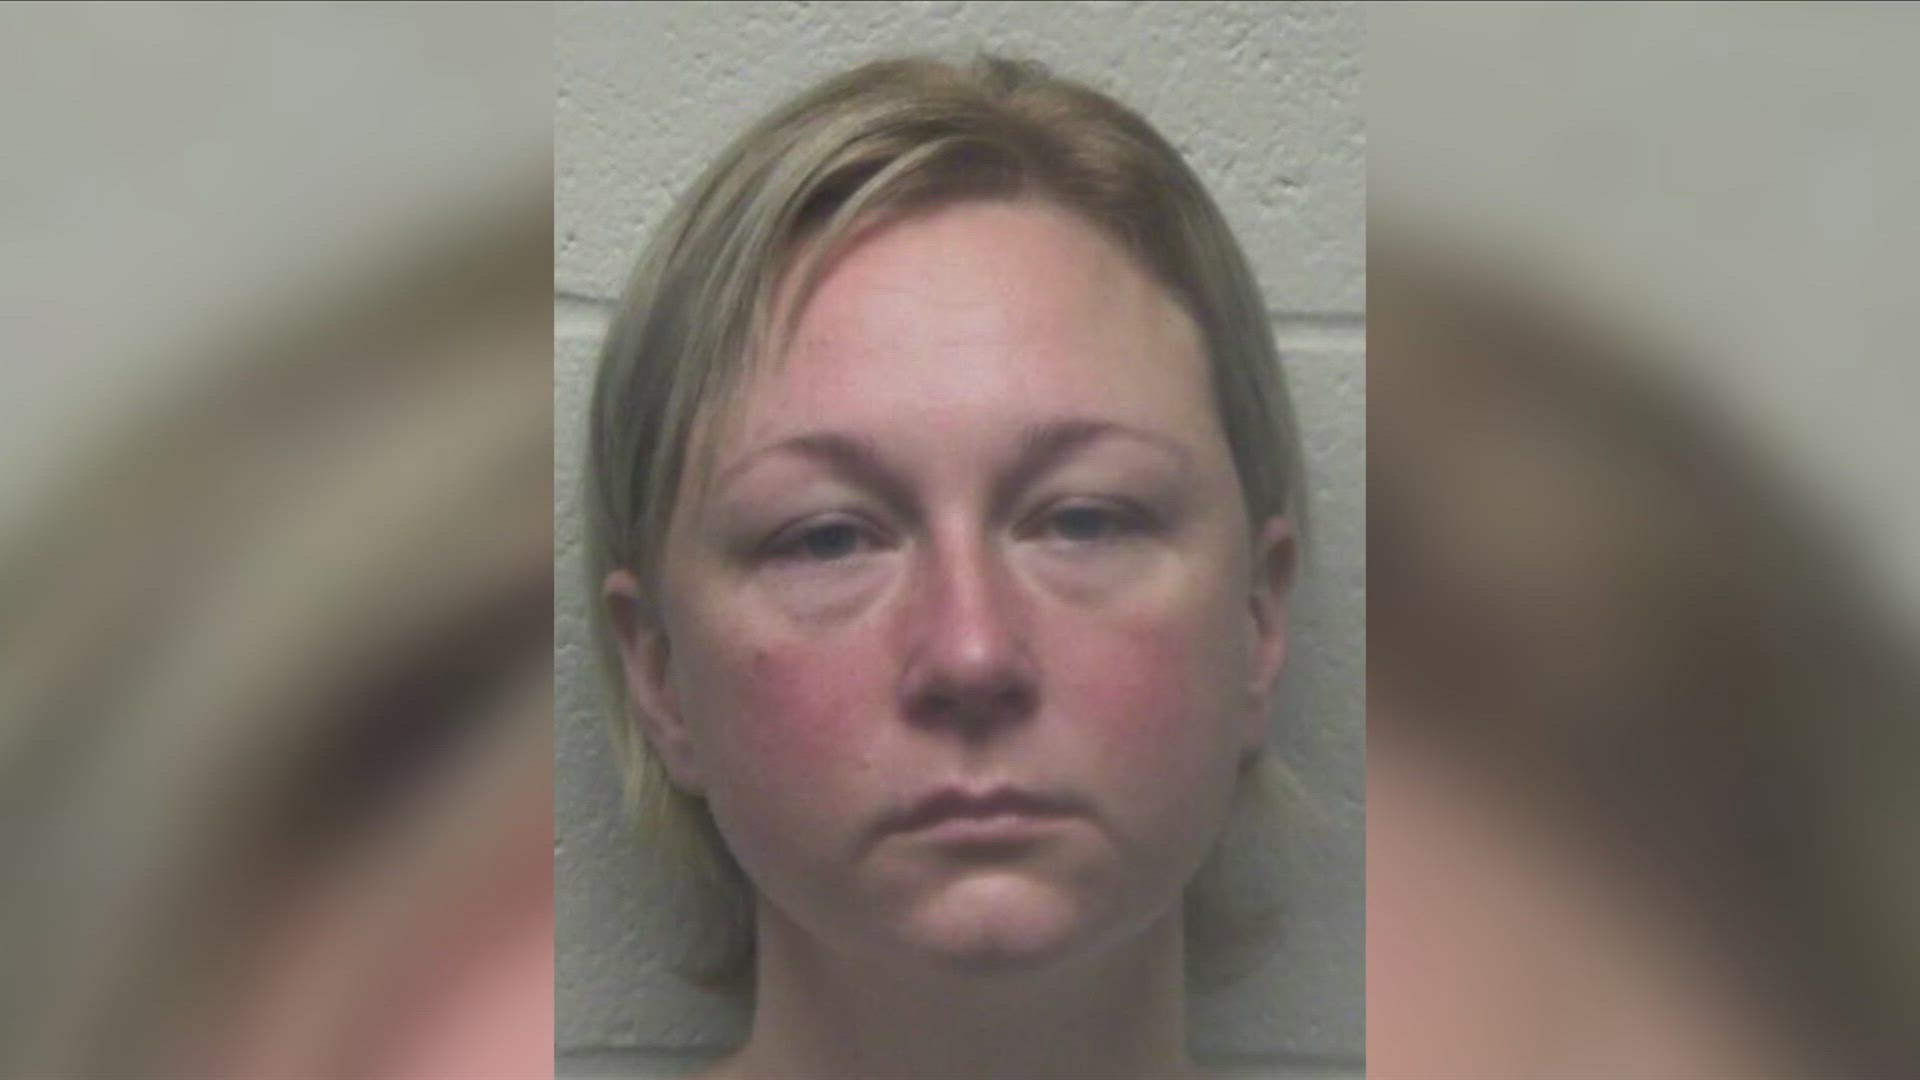 A grand jury returned a 23-count indictment against Alissa McCommon. She pleaded not guilty in court March 11.